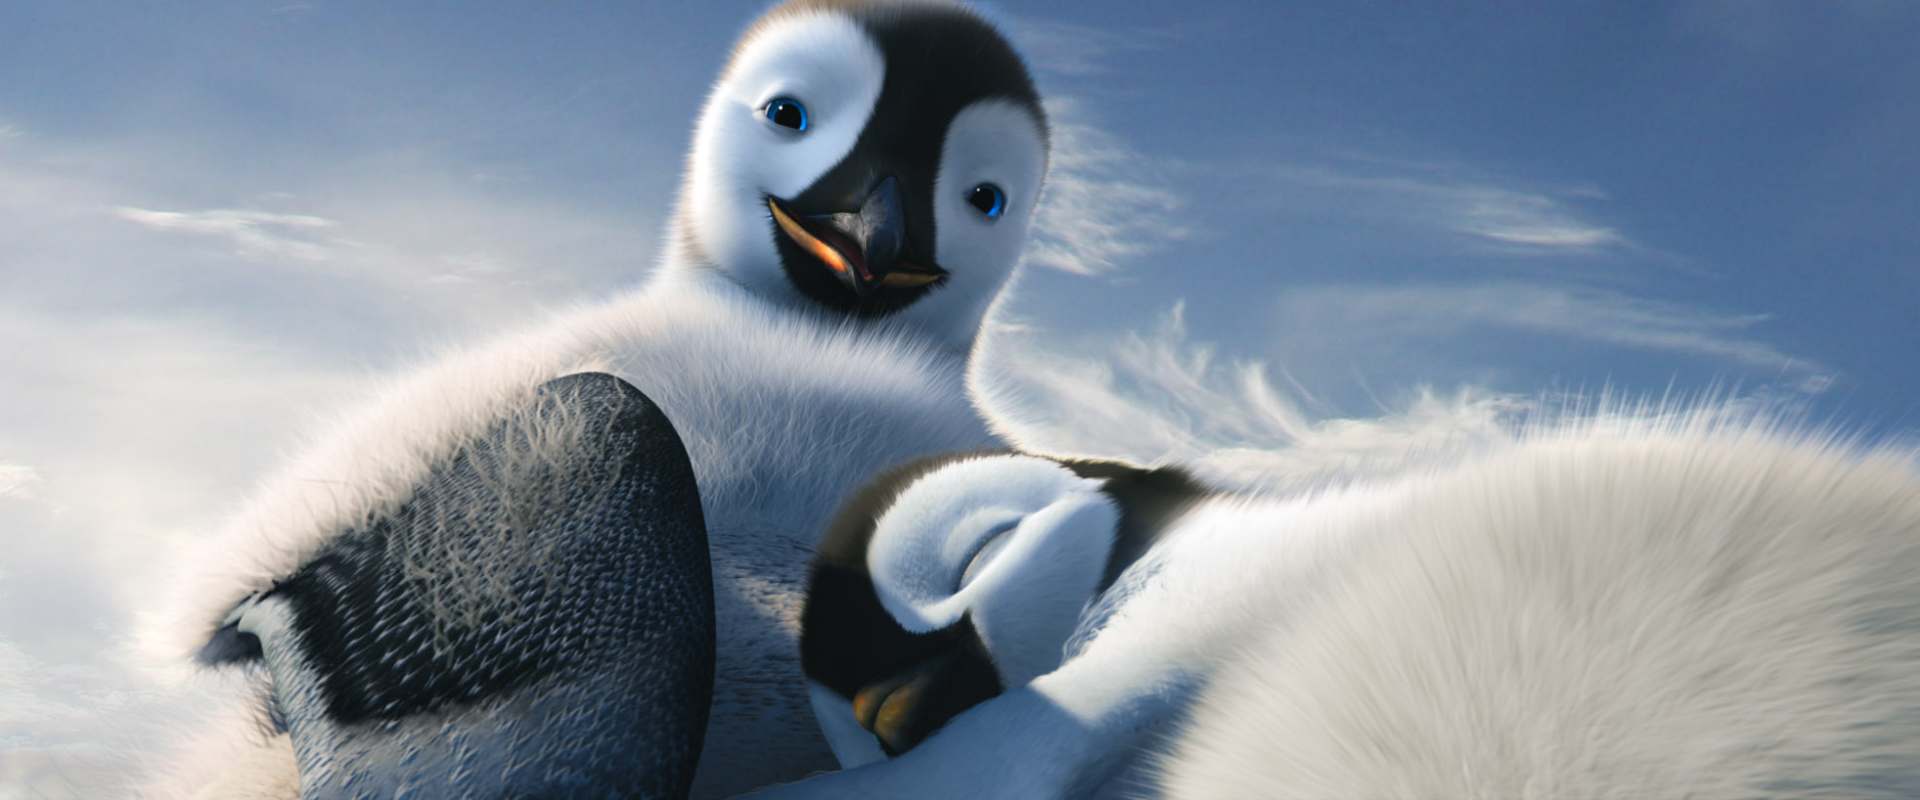 Happy Feet Two background 2